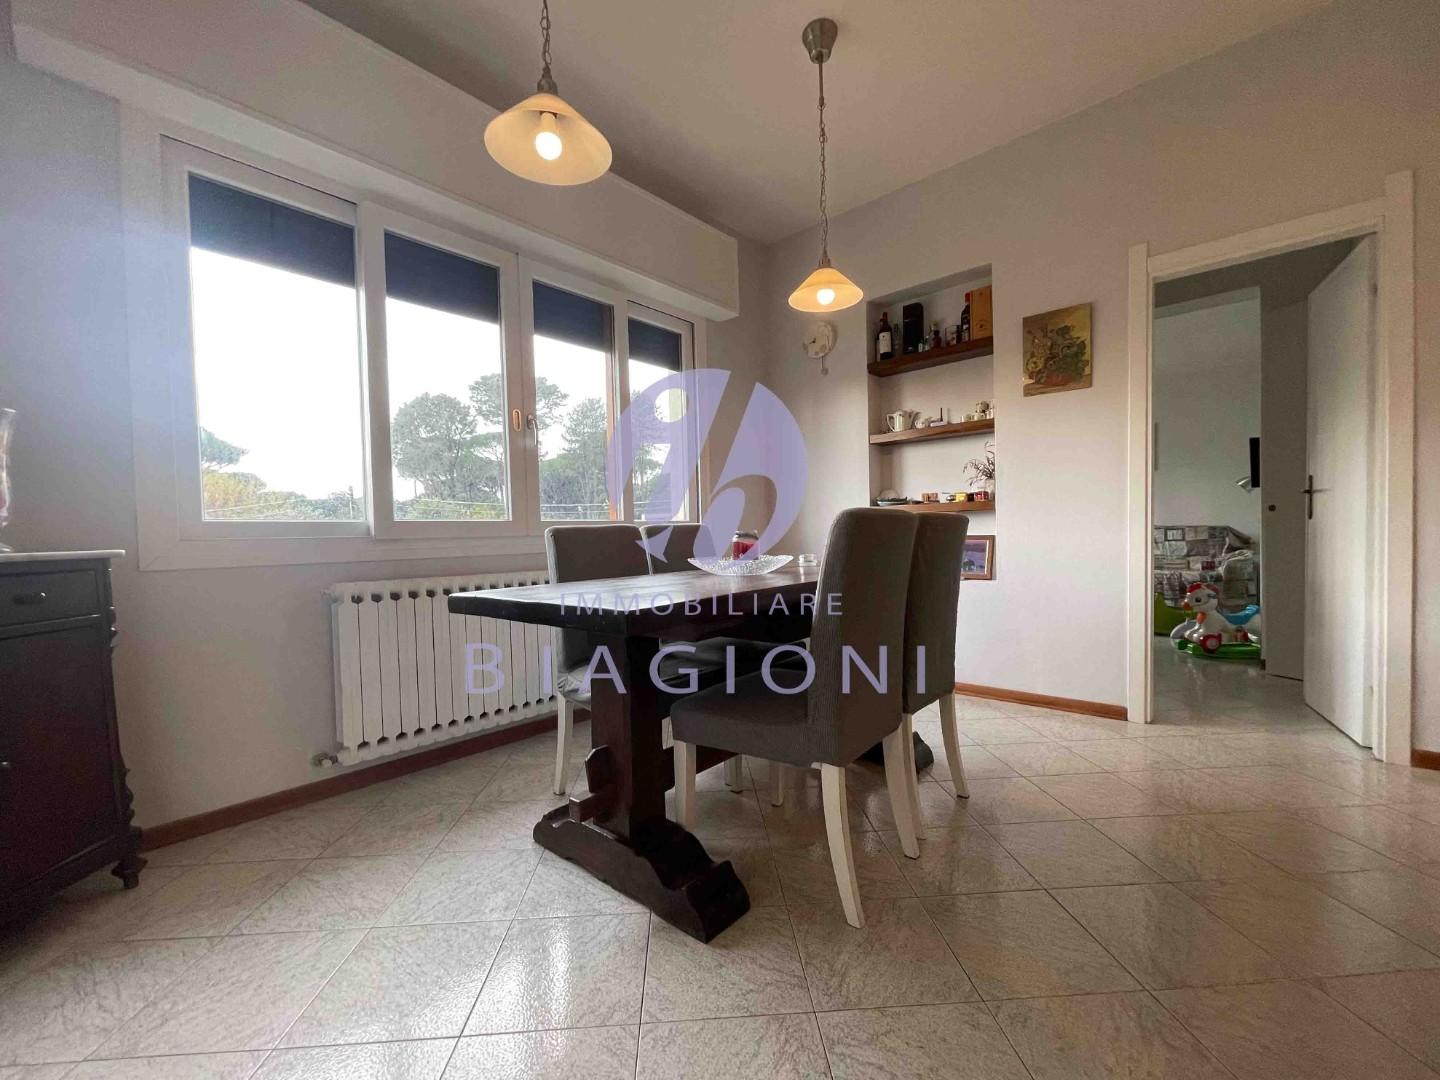 Apartment for sale, ref. 28096